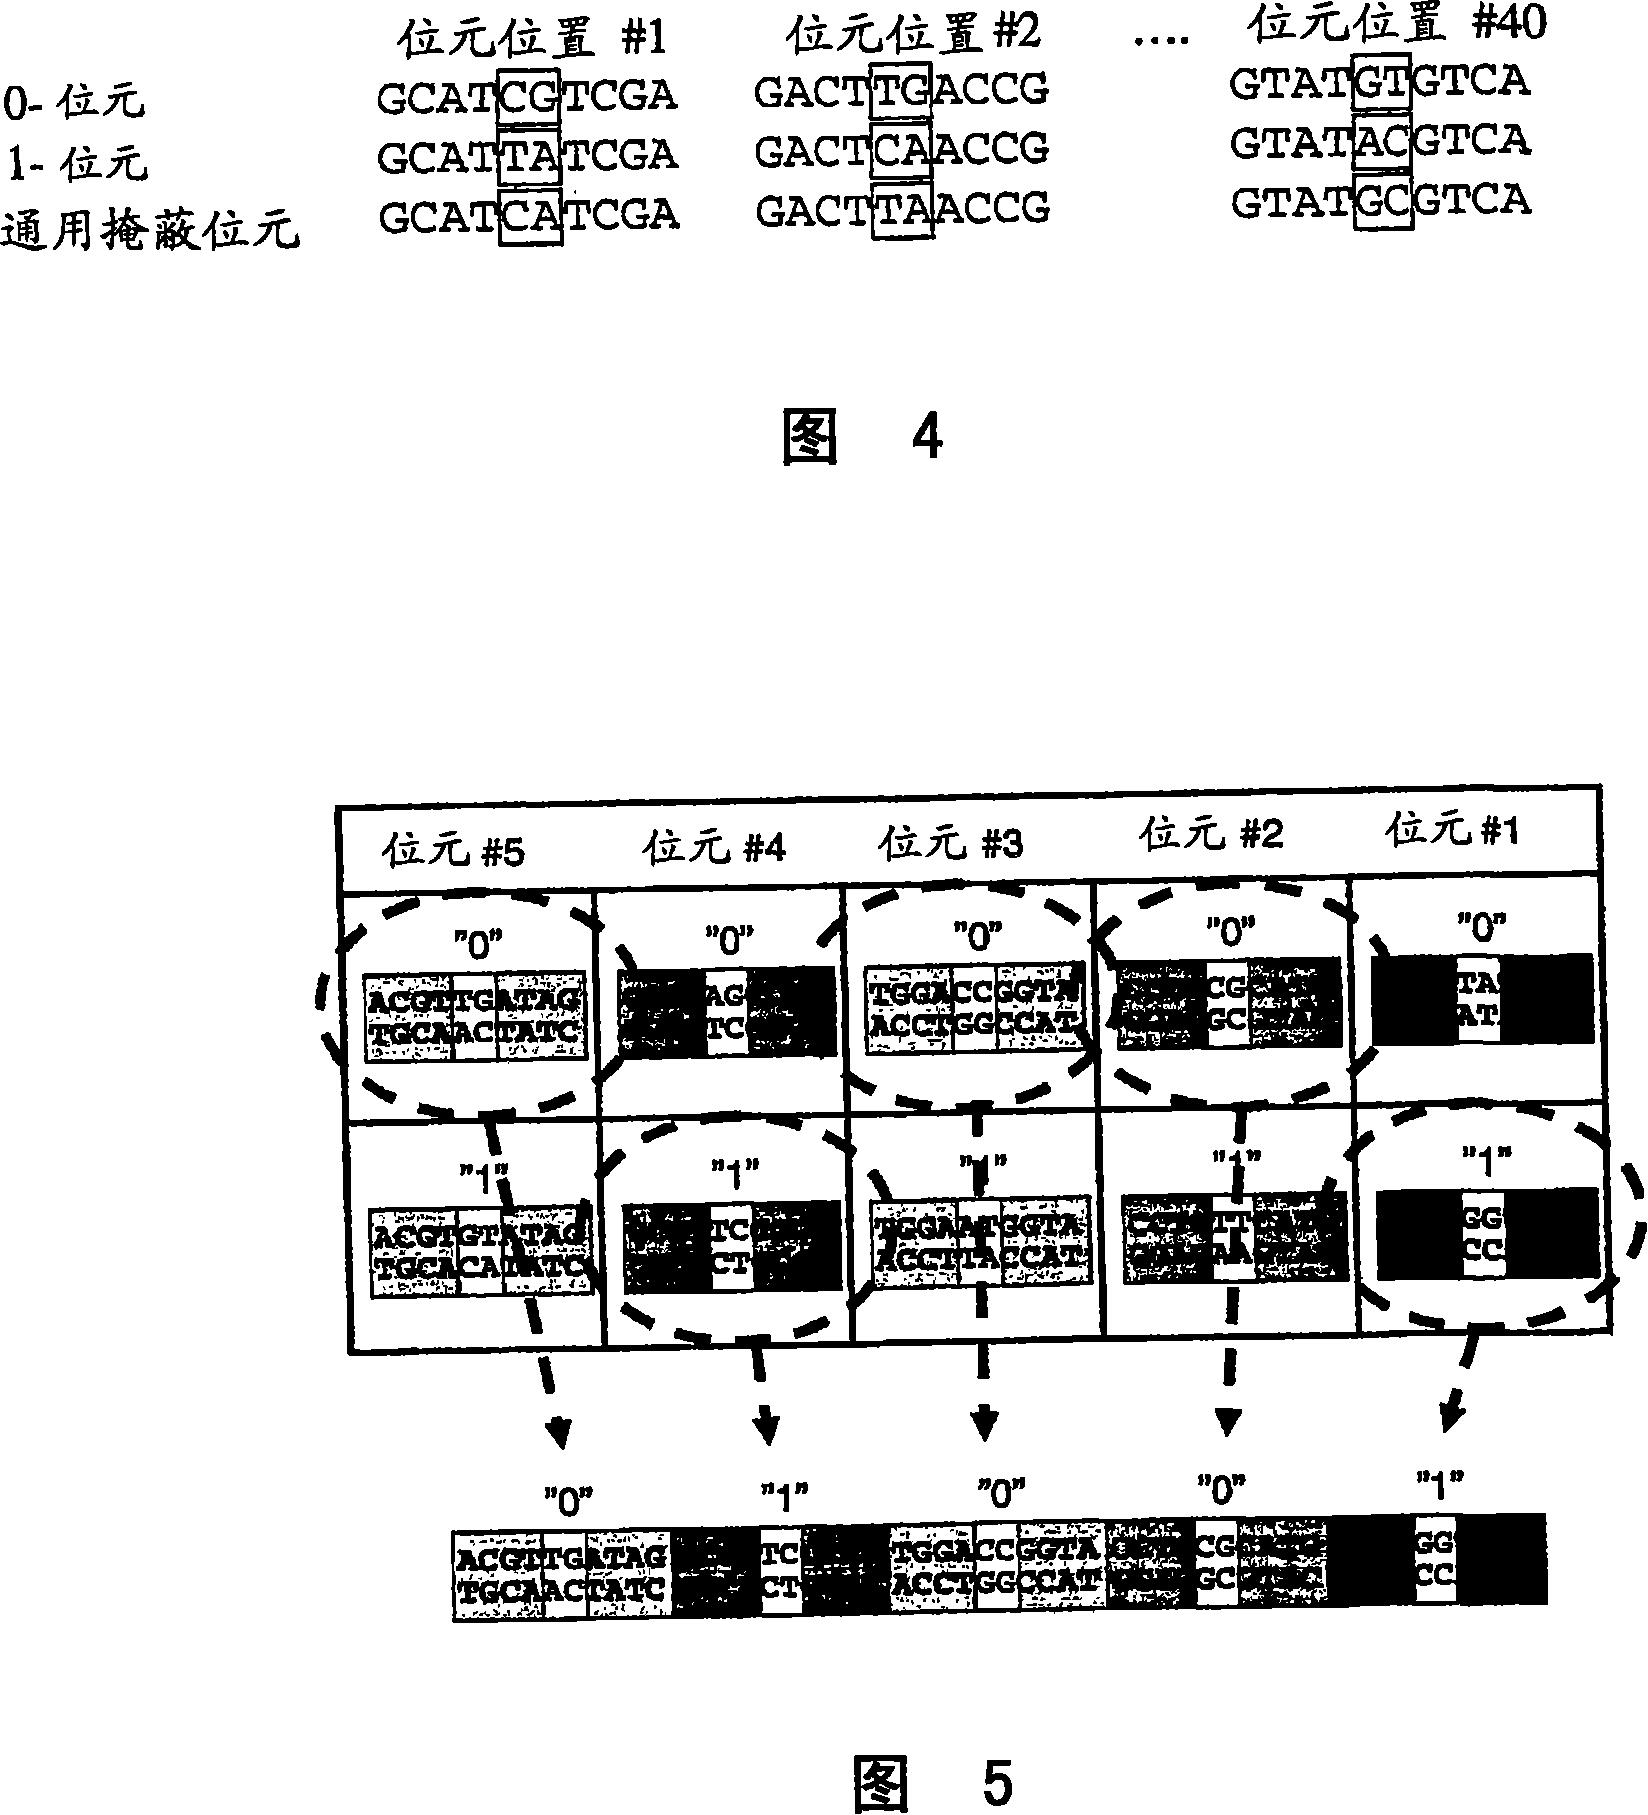 Method for preparing polynucleotides for analysis